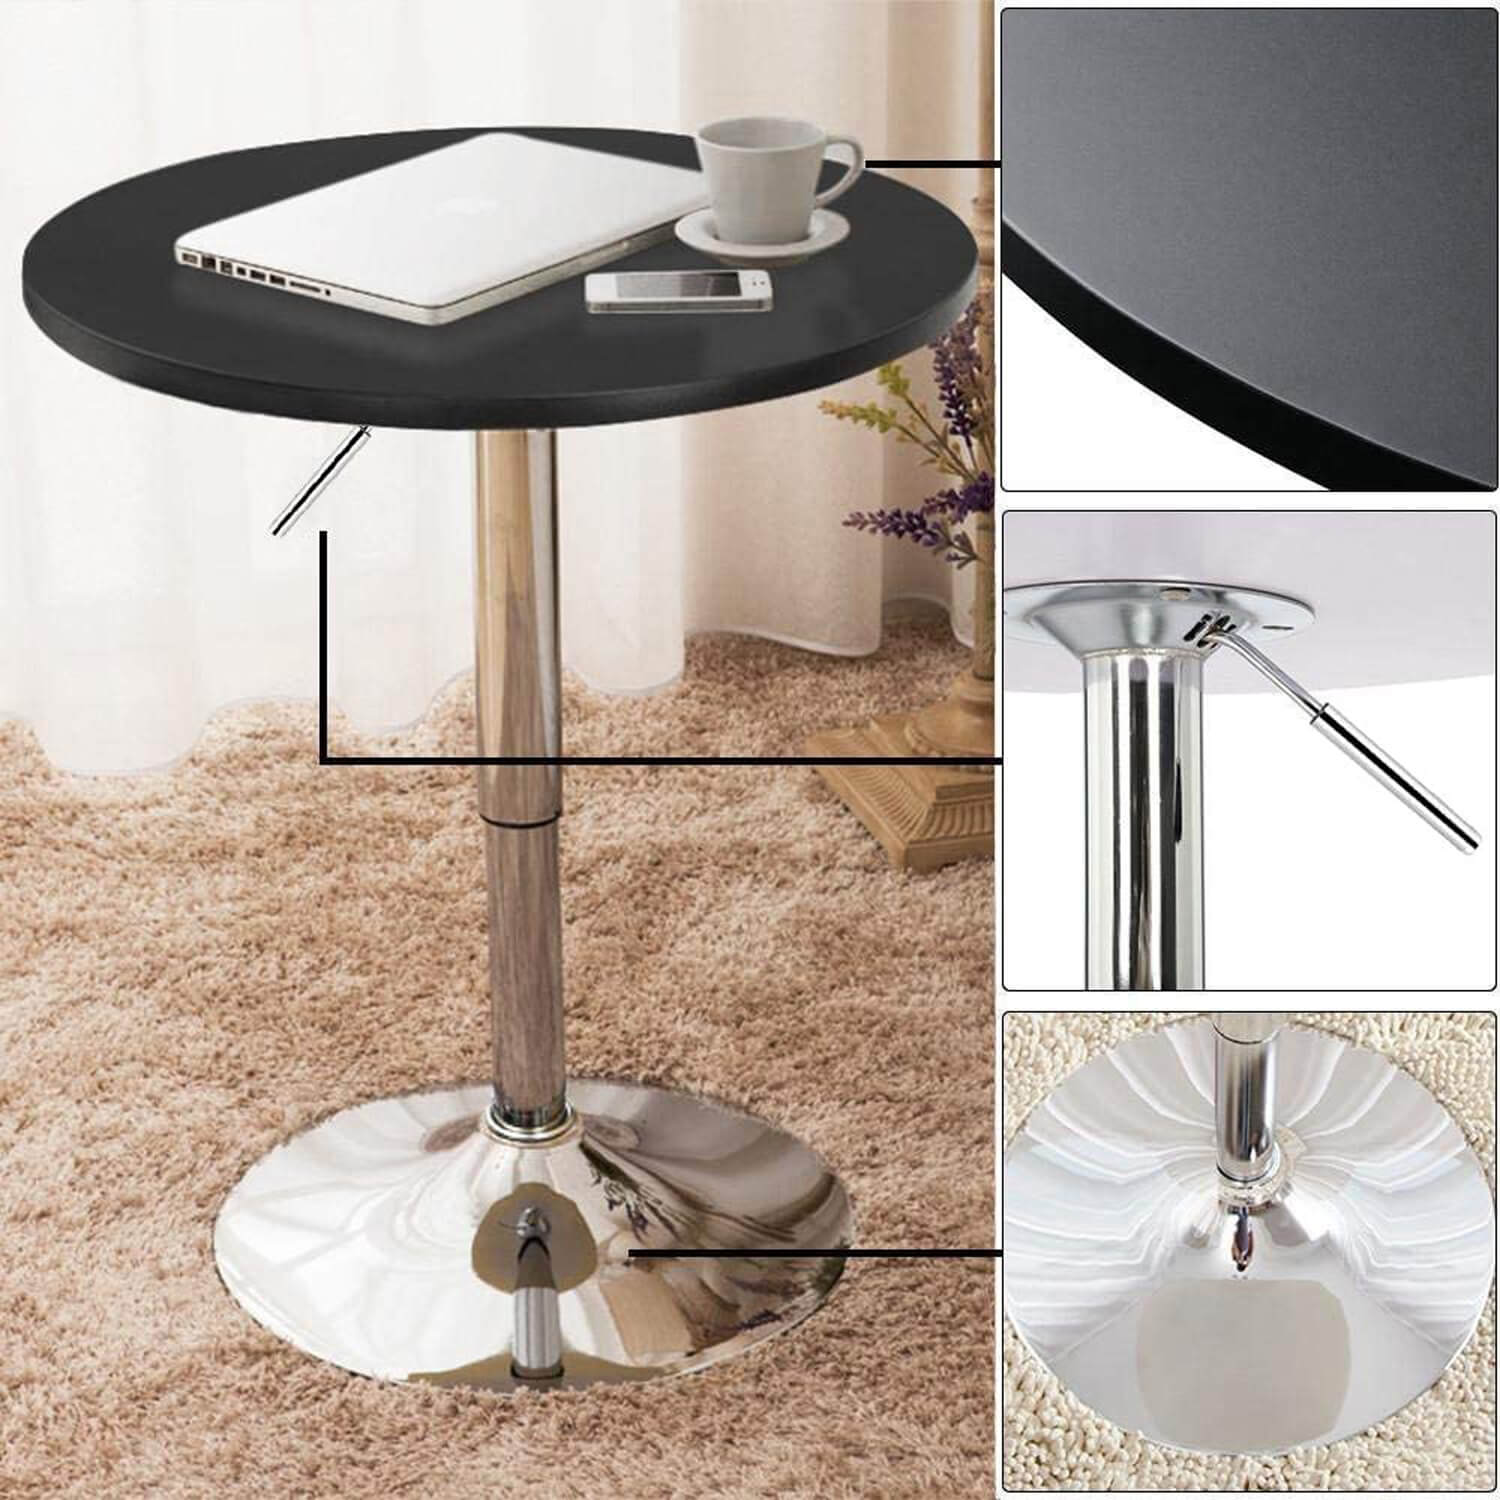 Elecwish black bar table features display